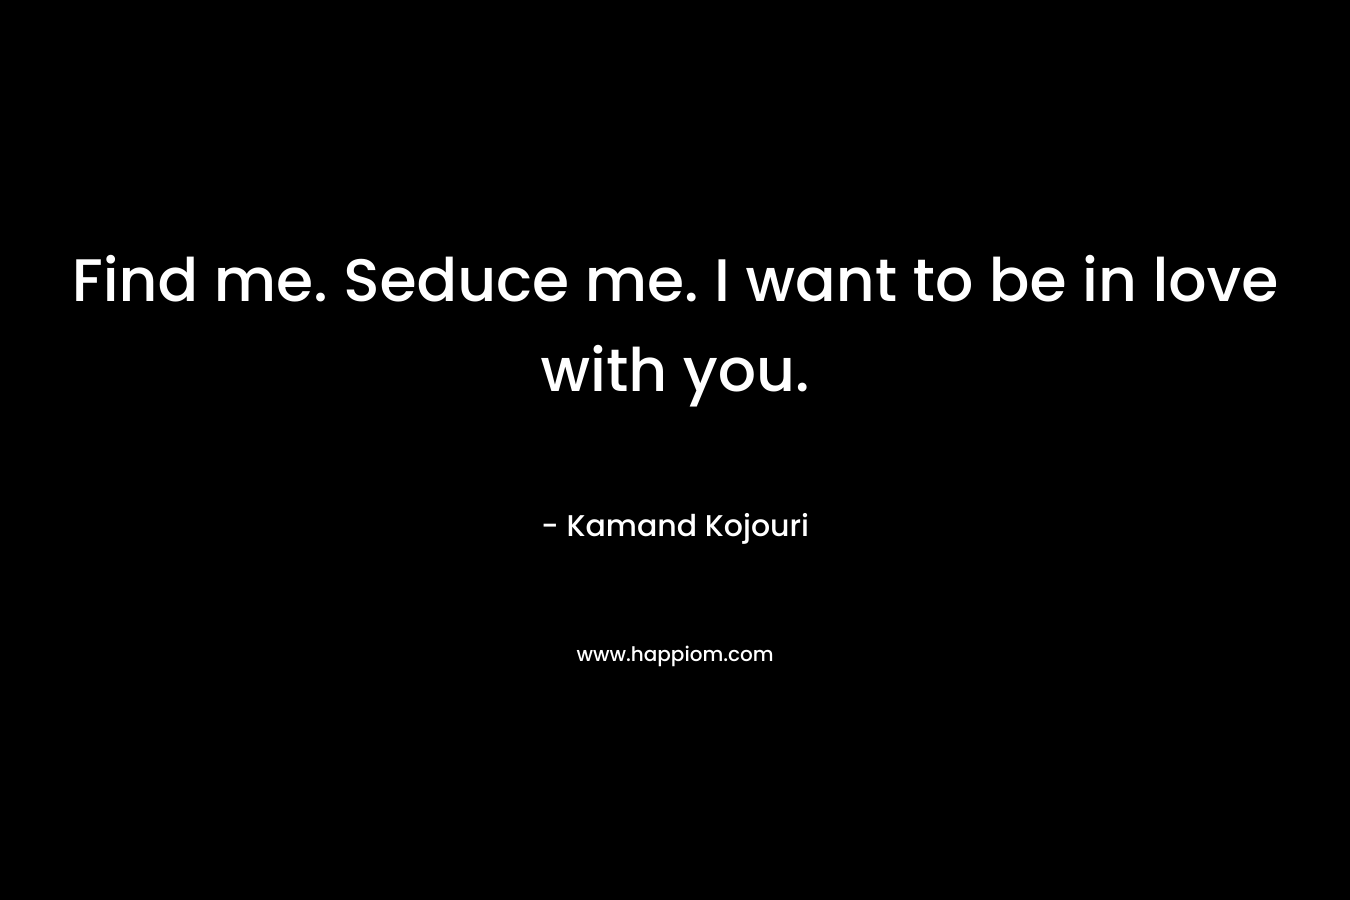 Find me. Seduce me. I want to be in love with you.